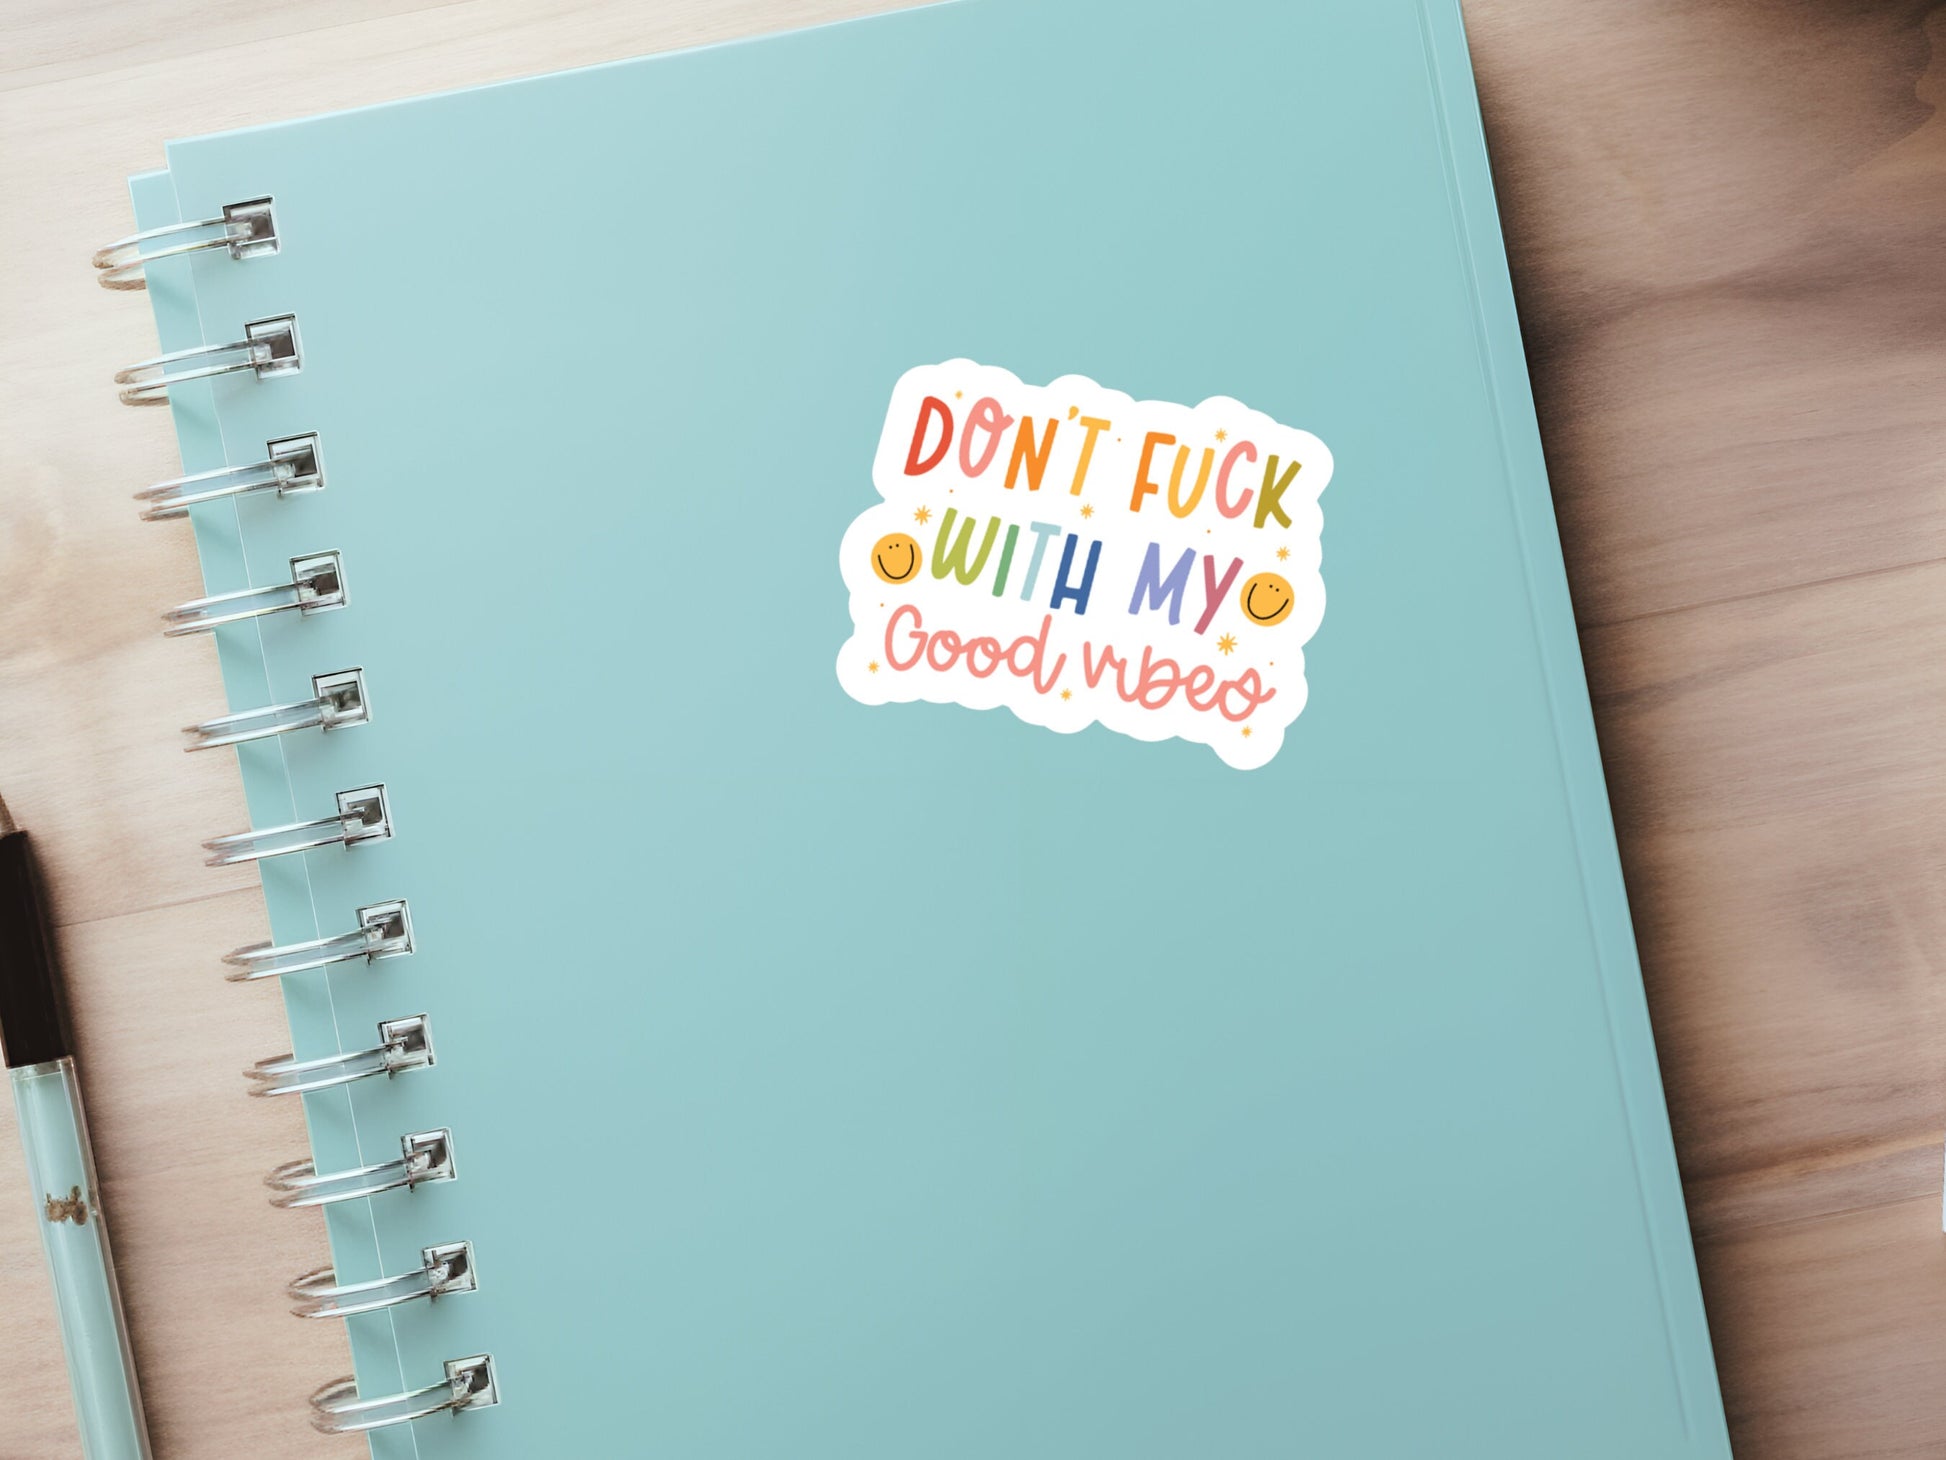 good vibes sticker, mental health stickers, don't fuck with, positivity stickers, good vibes only, journal stickers, positive quotes